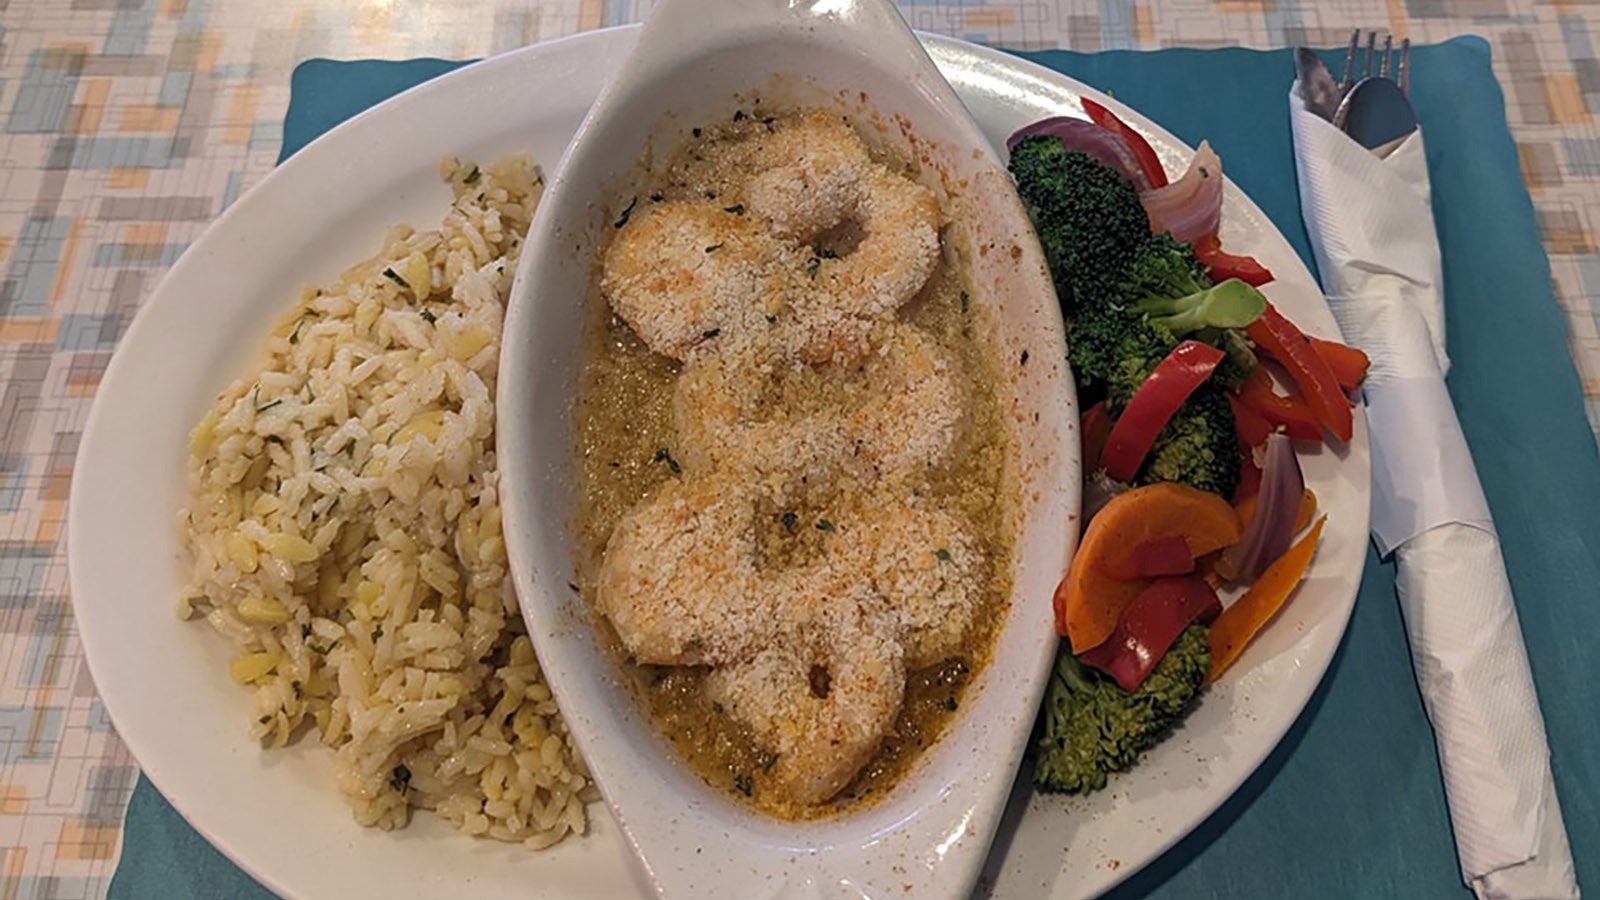 The menu has variety, like this Panko-dusted shrimp scampi.